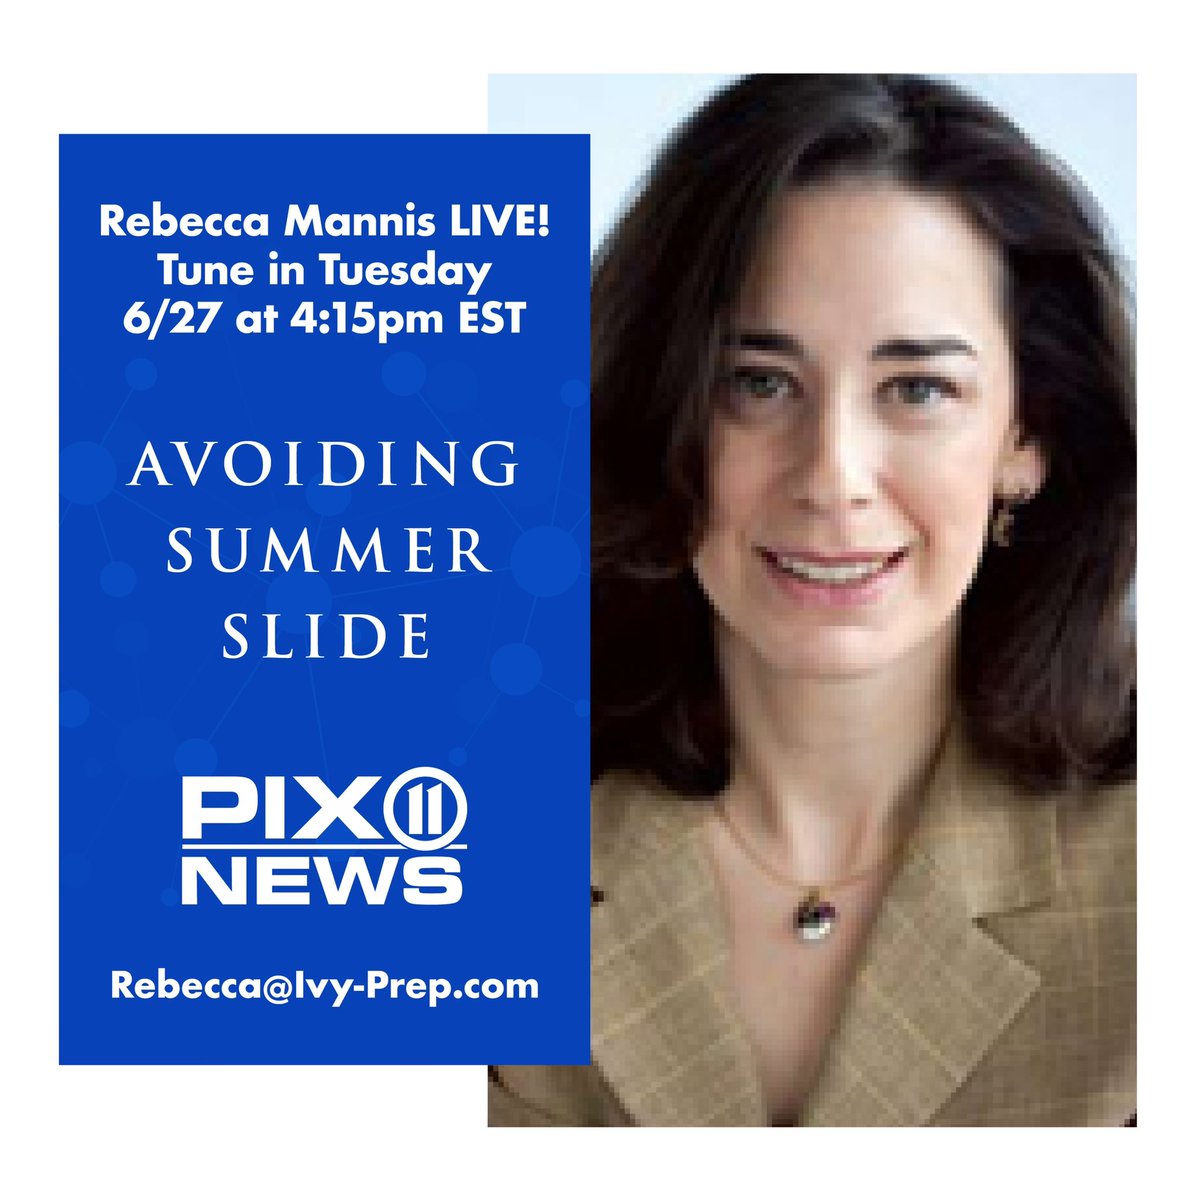 Is your child feeling the effects of the summer slide? 🌞✏️ Today at 4:15PM EST, our own Dr. Rebecca Mannis will be joining @PIX11News to shed light on this important topic!  
#SummerSlideSolutions #Education #TuneIn #LearningSpecialist #summerslide #dyslexia #dysgraphia #NYC